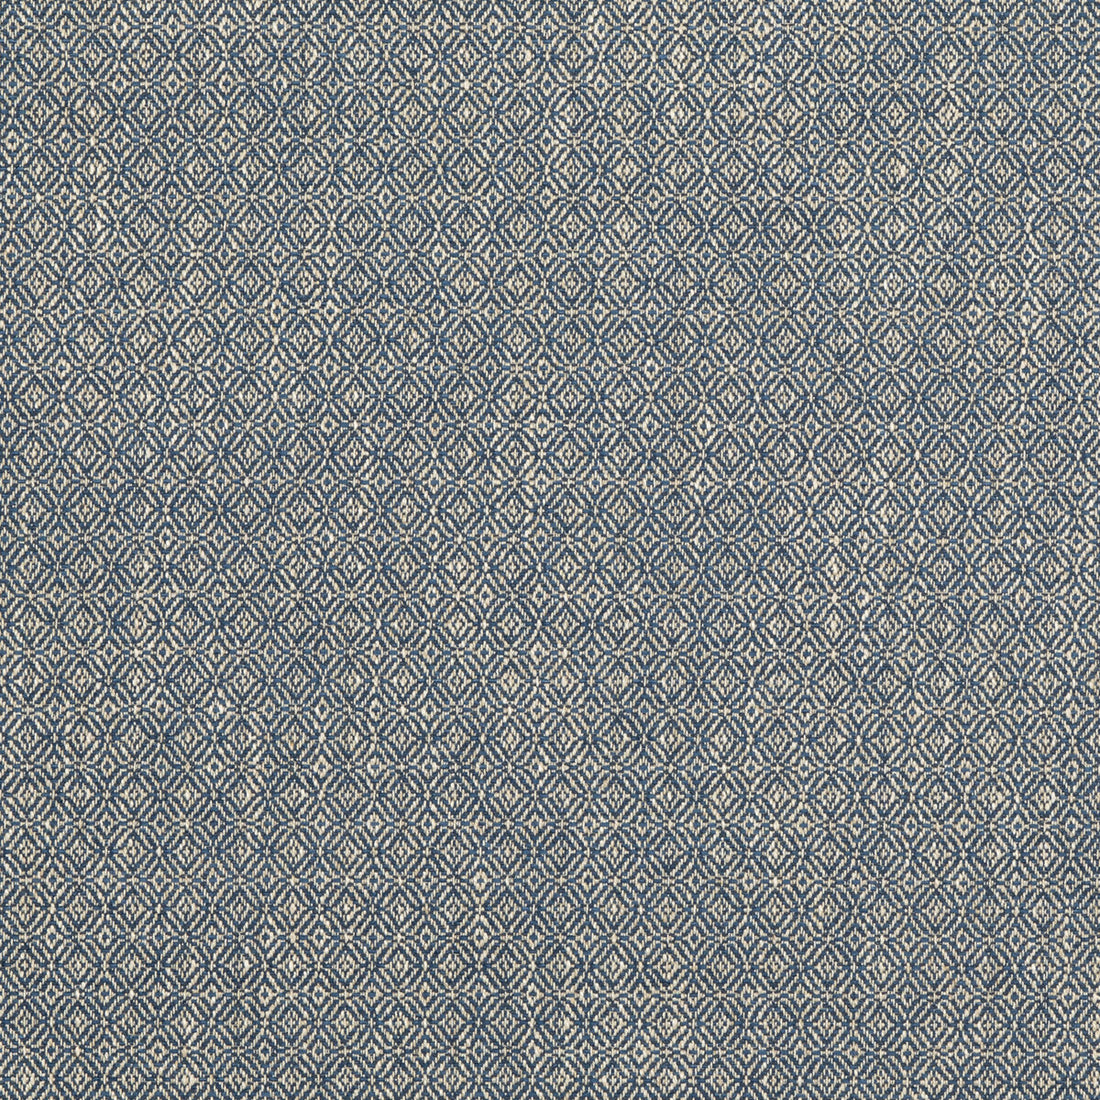 Kenton fabric in blue color - pattern BF10868.660.0 - by G P &amp; J Baker in the Essential Colours II collection